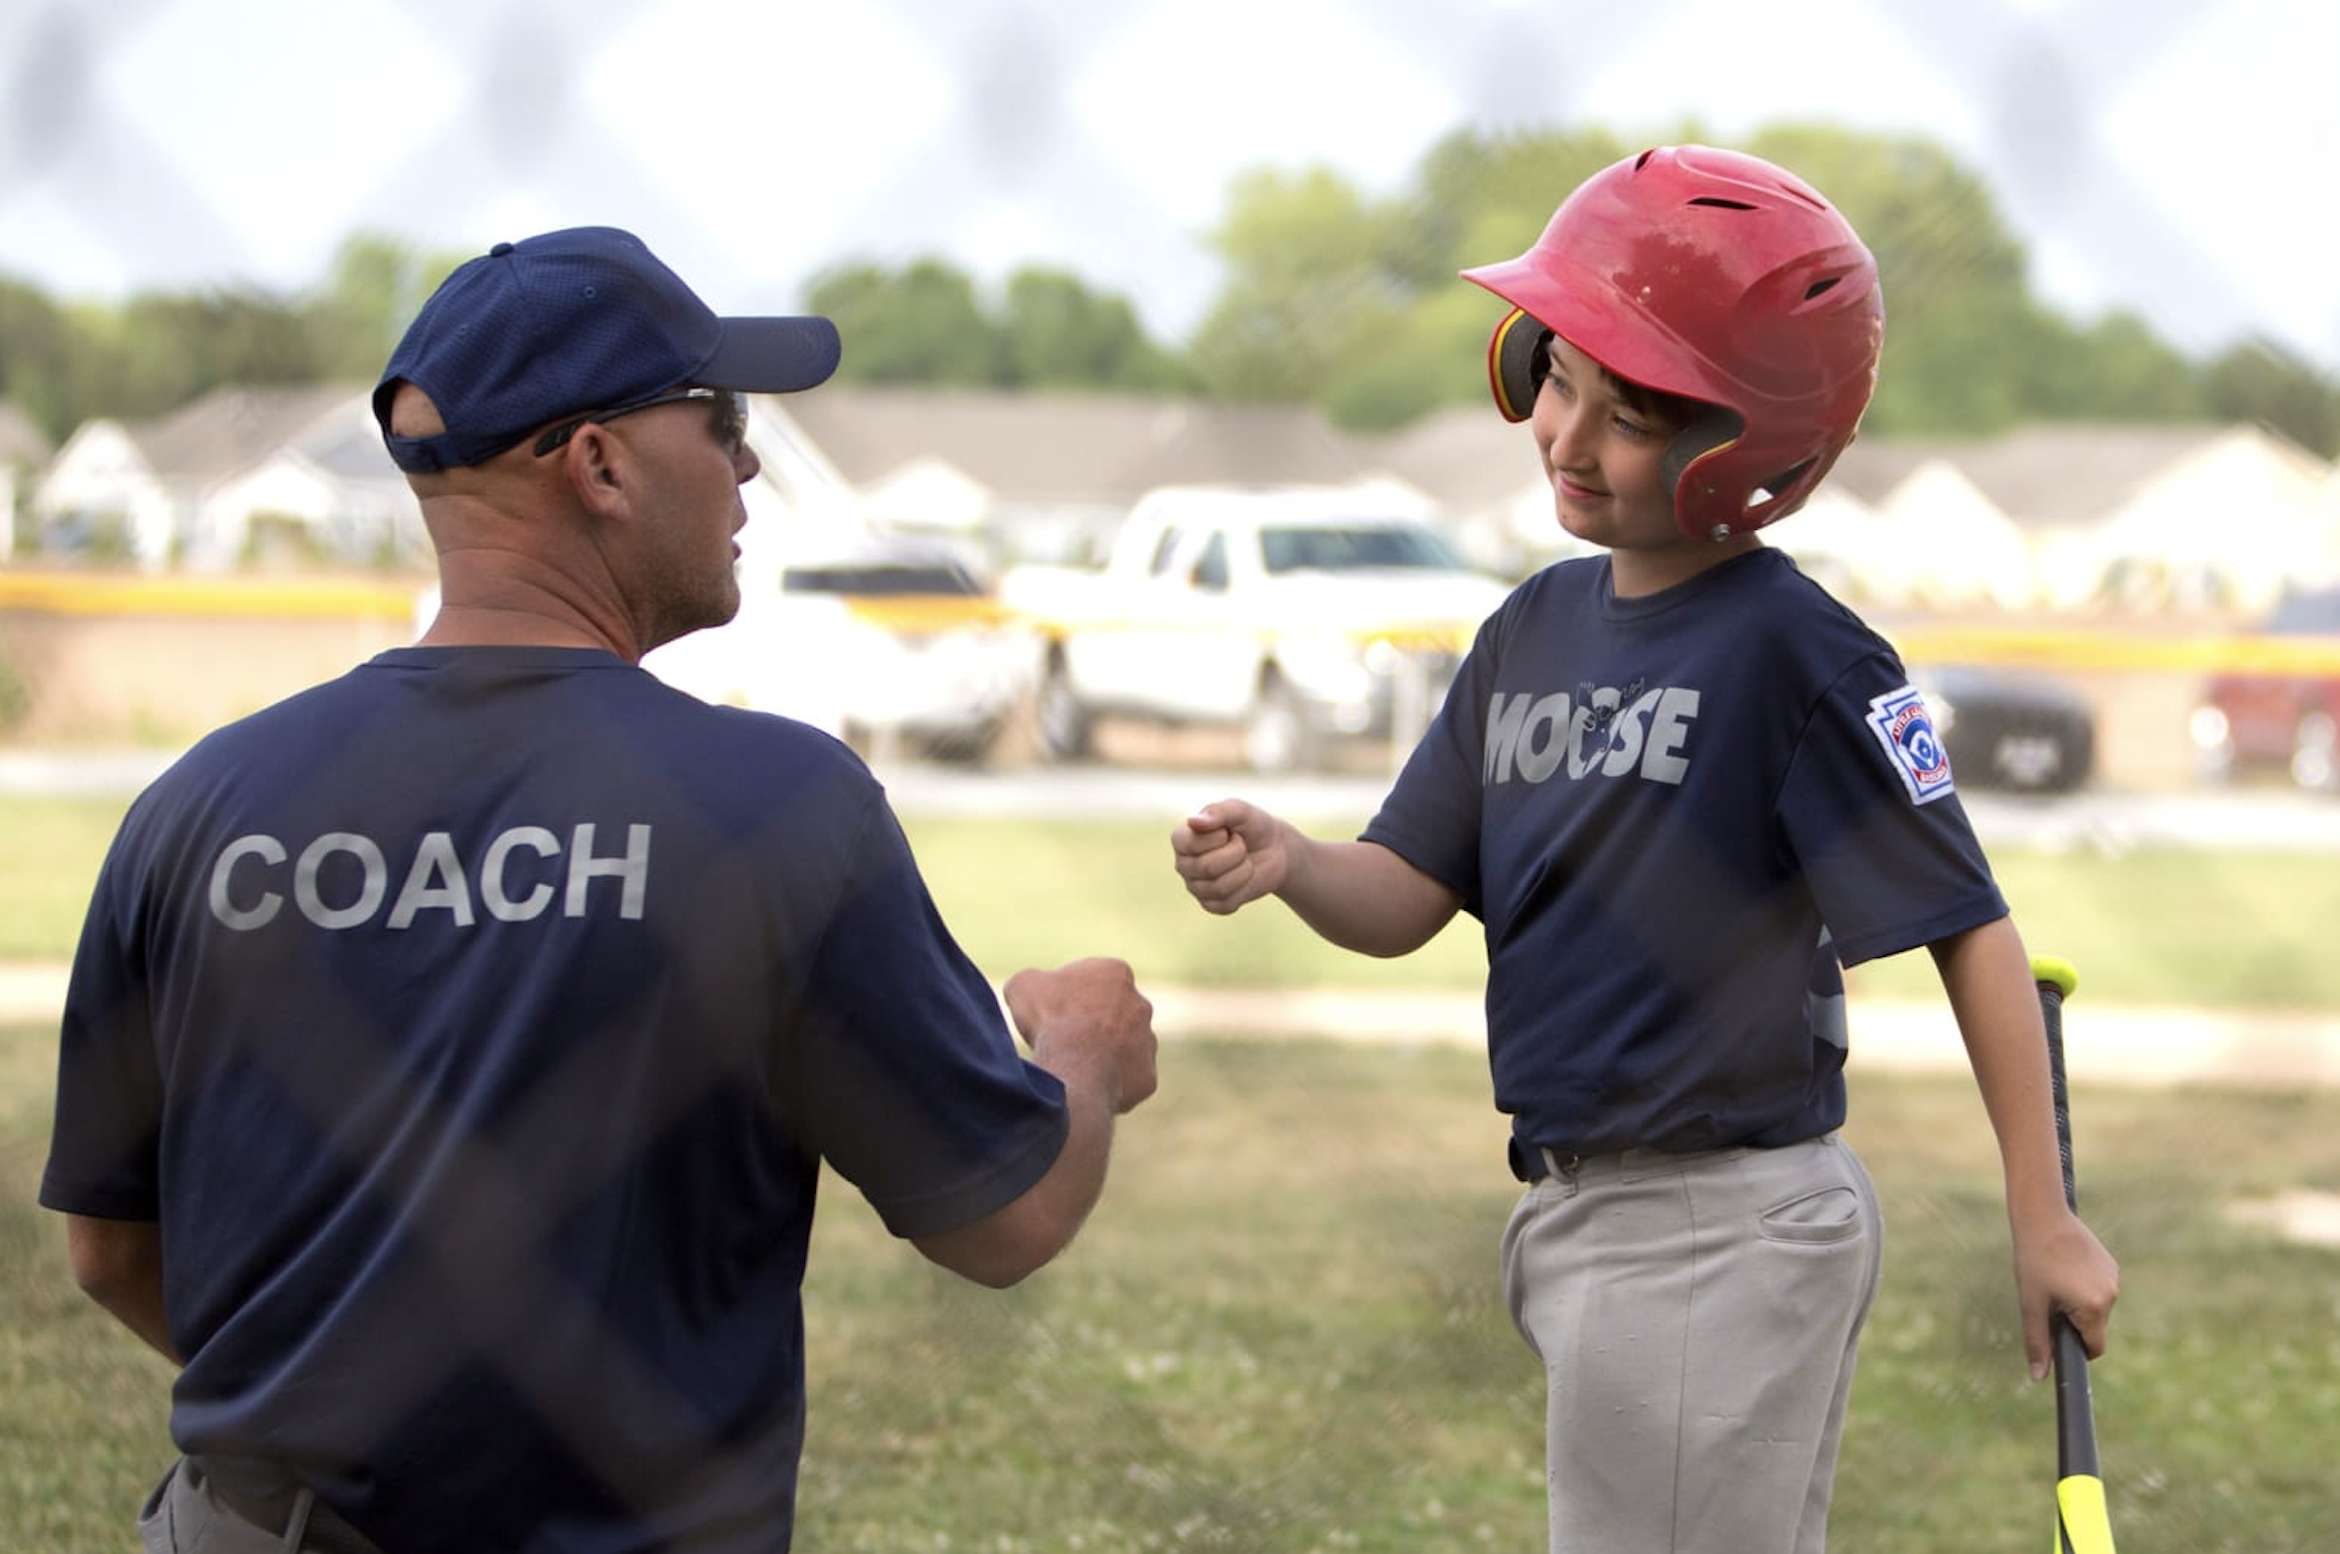 Little League Coaches and Fundraising